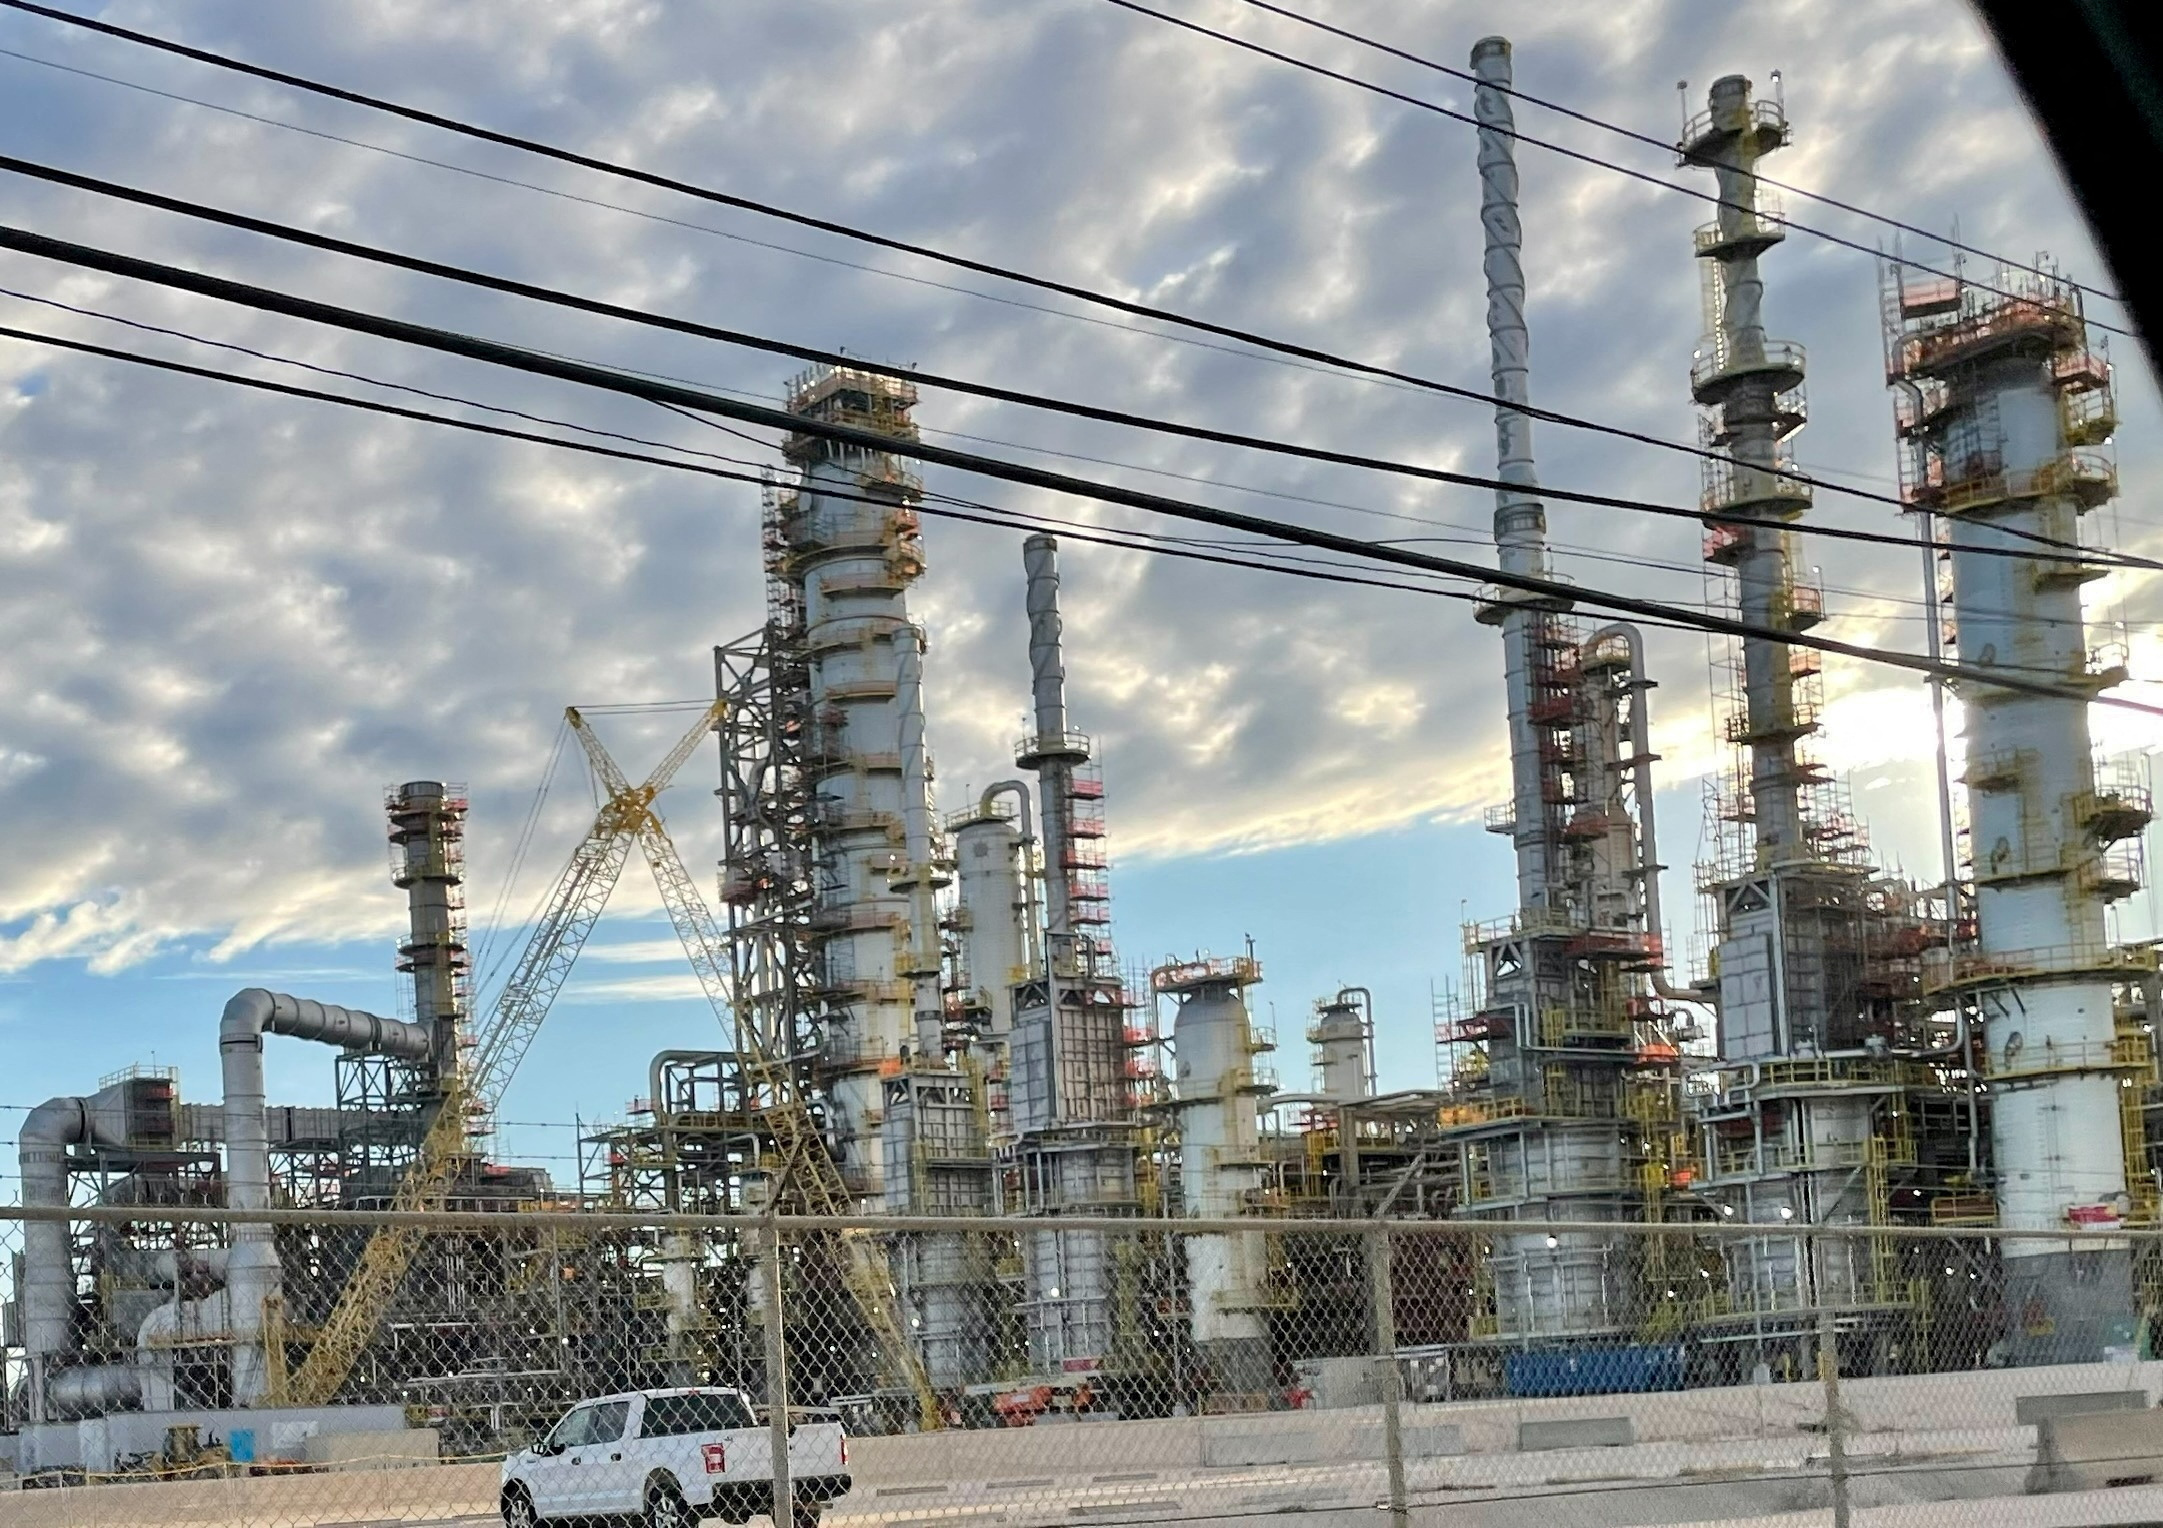 A general view of a new crude distillation unit under construction at Exxon Mobil's refinery in Beaumont, Texas